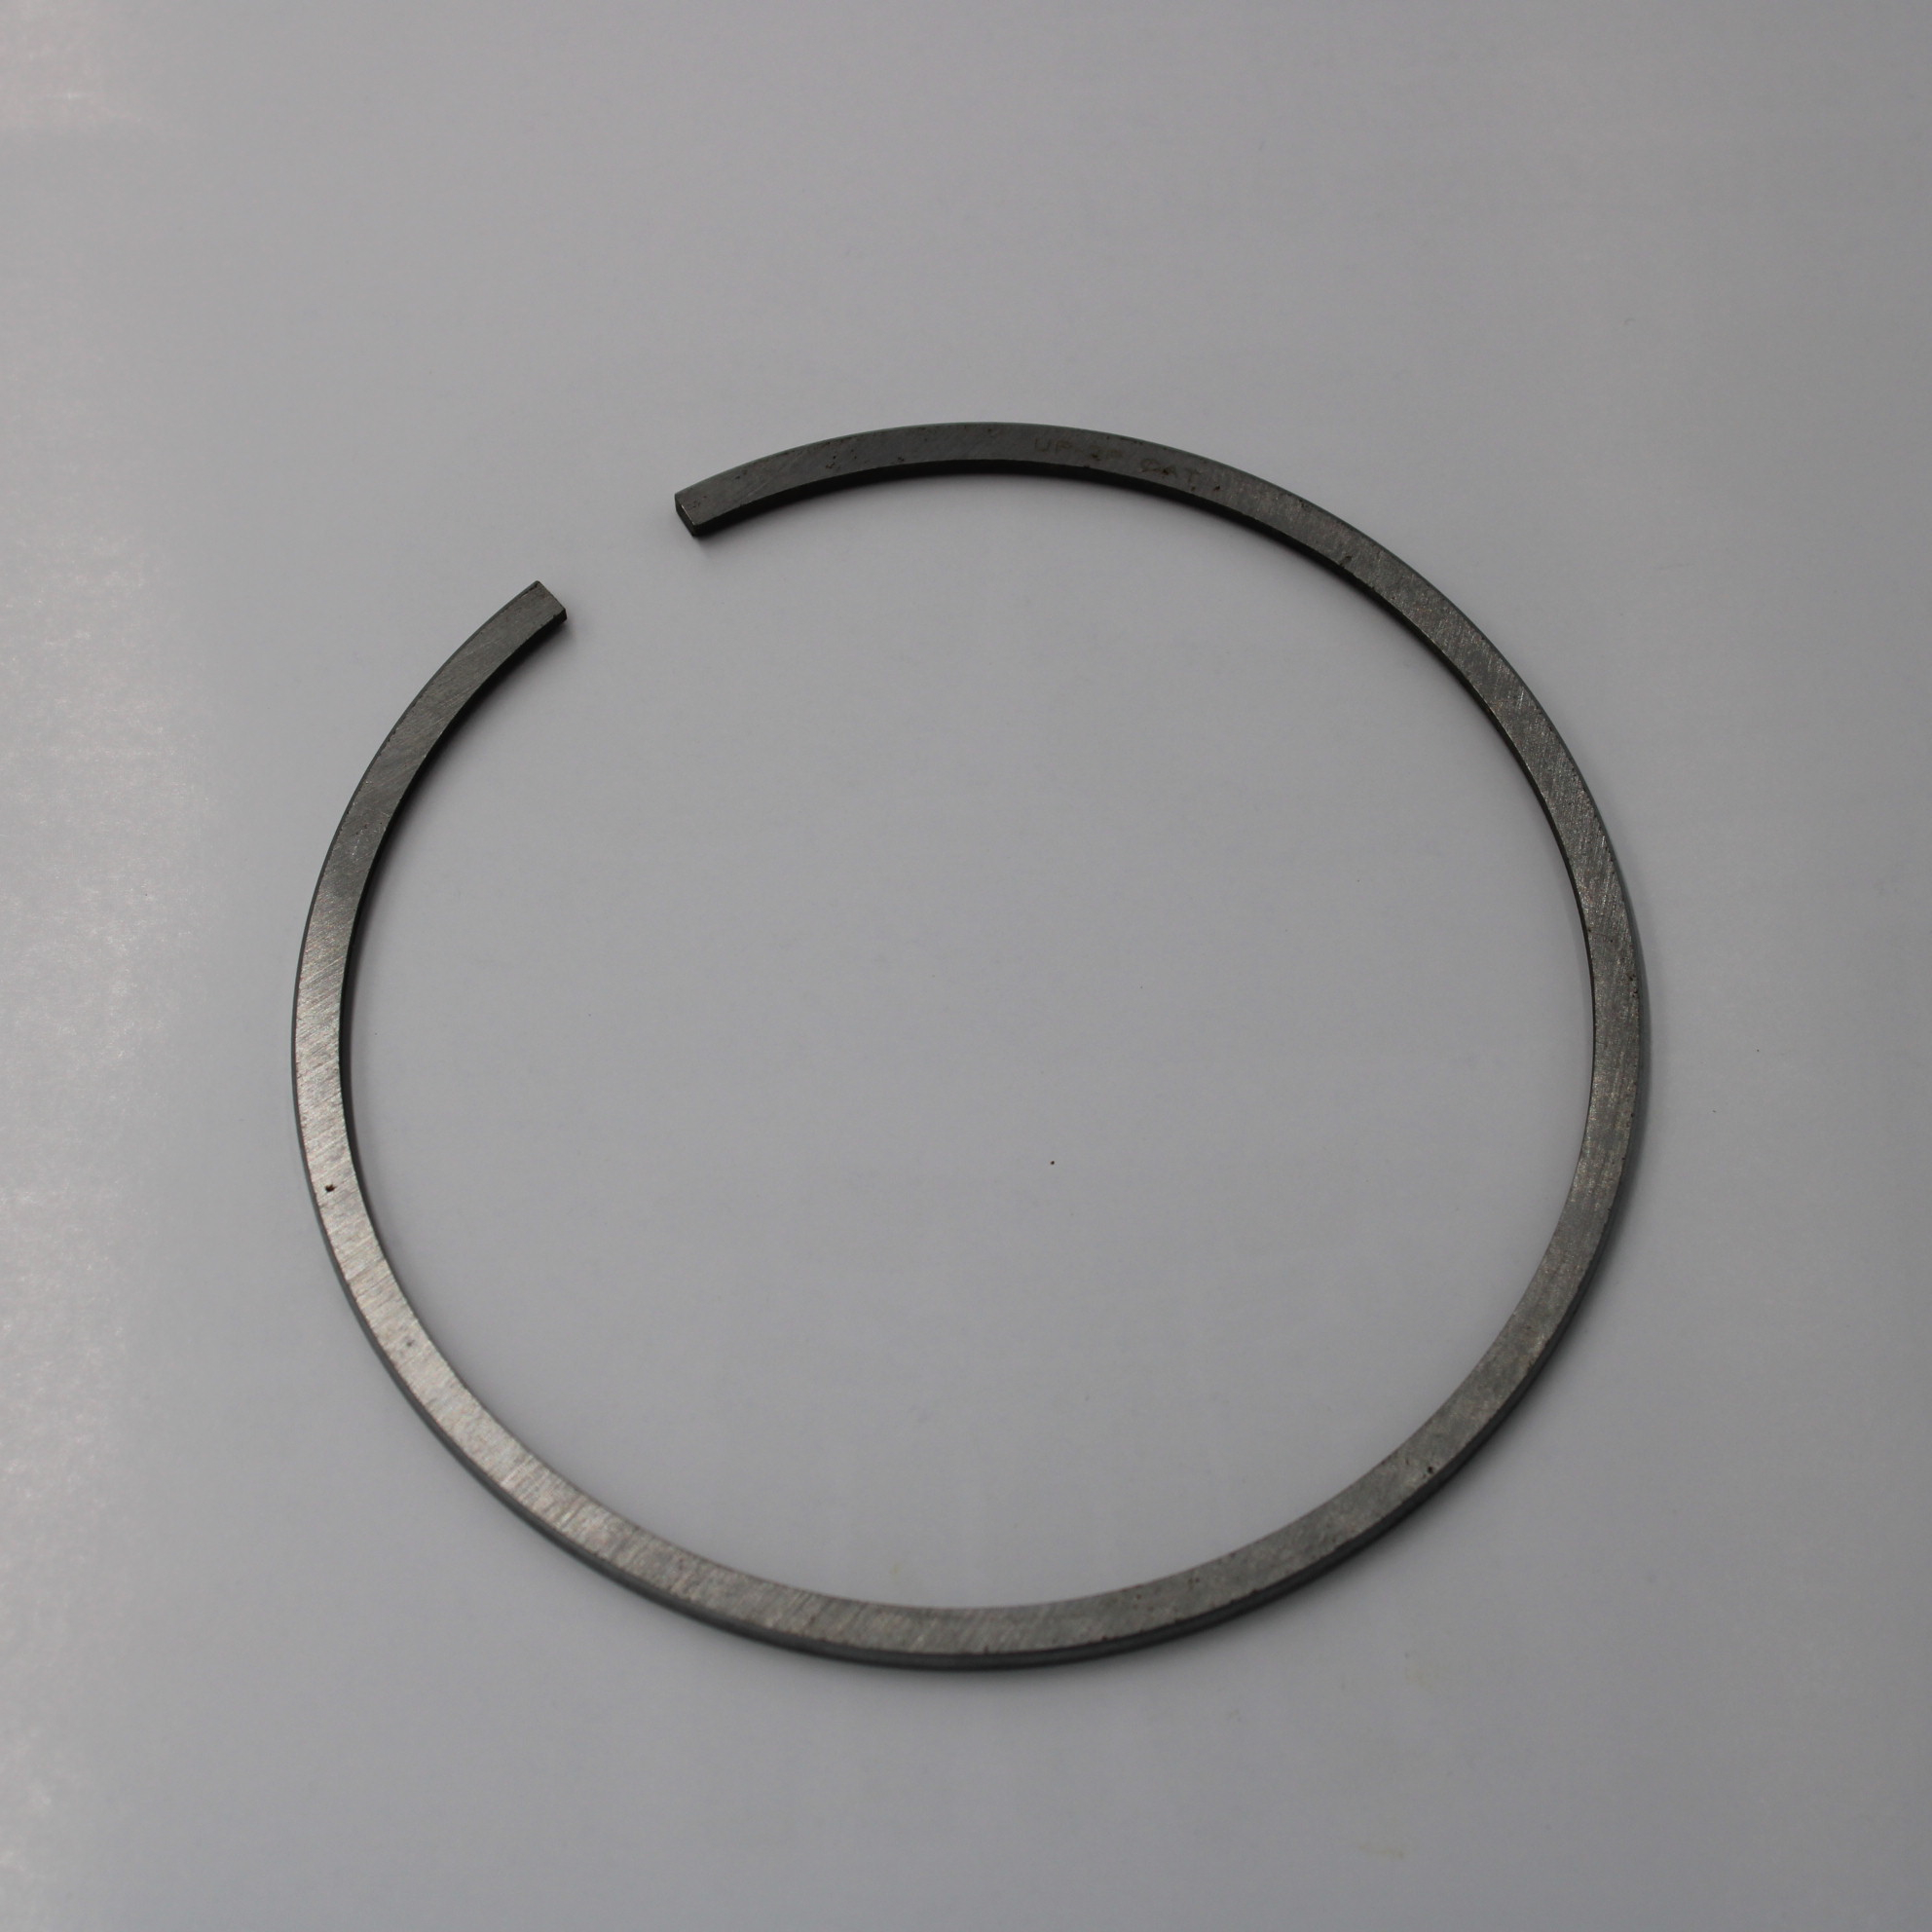 Piston ring 197-9353 of for caterpillar C7 engine and 197-9353 of for caterpillar 324d / 328d / 329d / 309d engine 